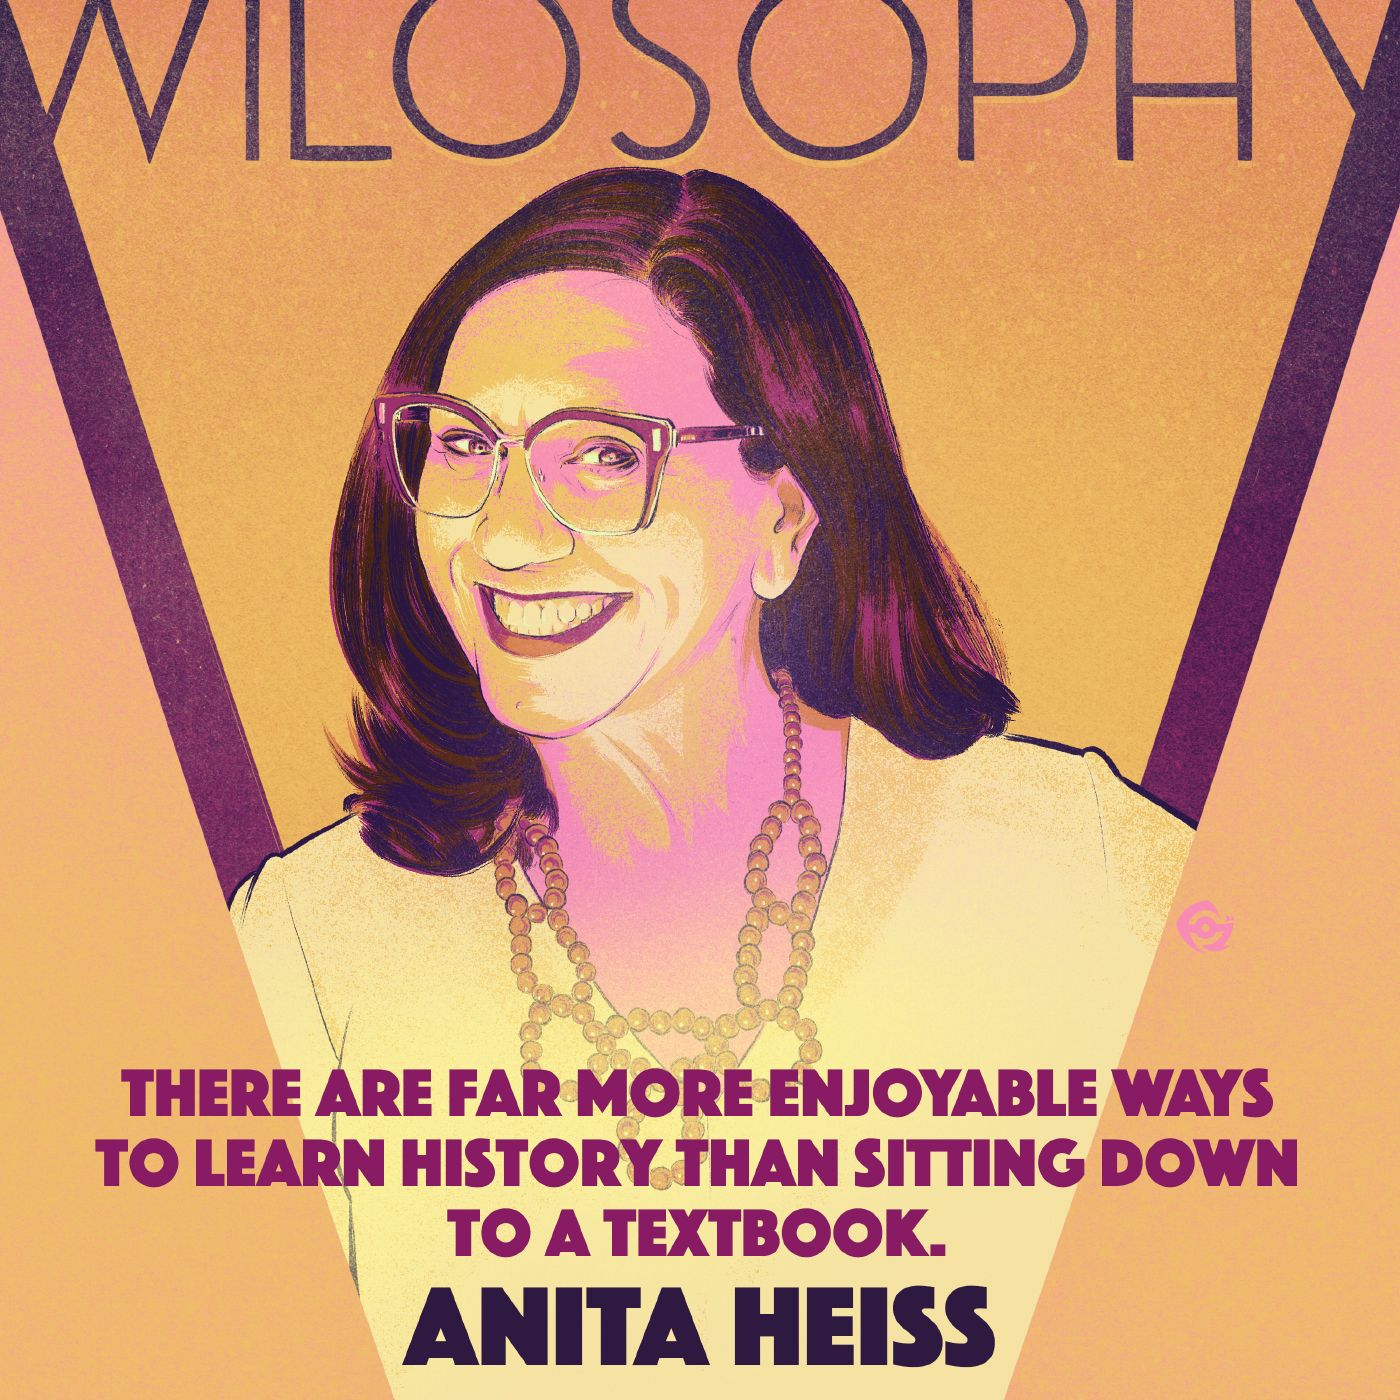 WILOSOPHY with Anita Heiss